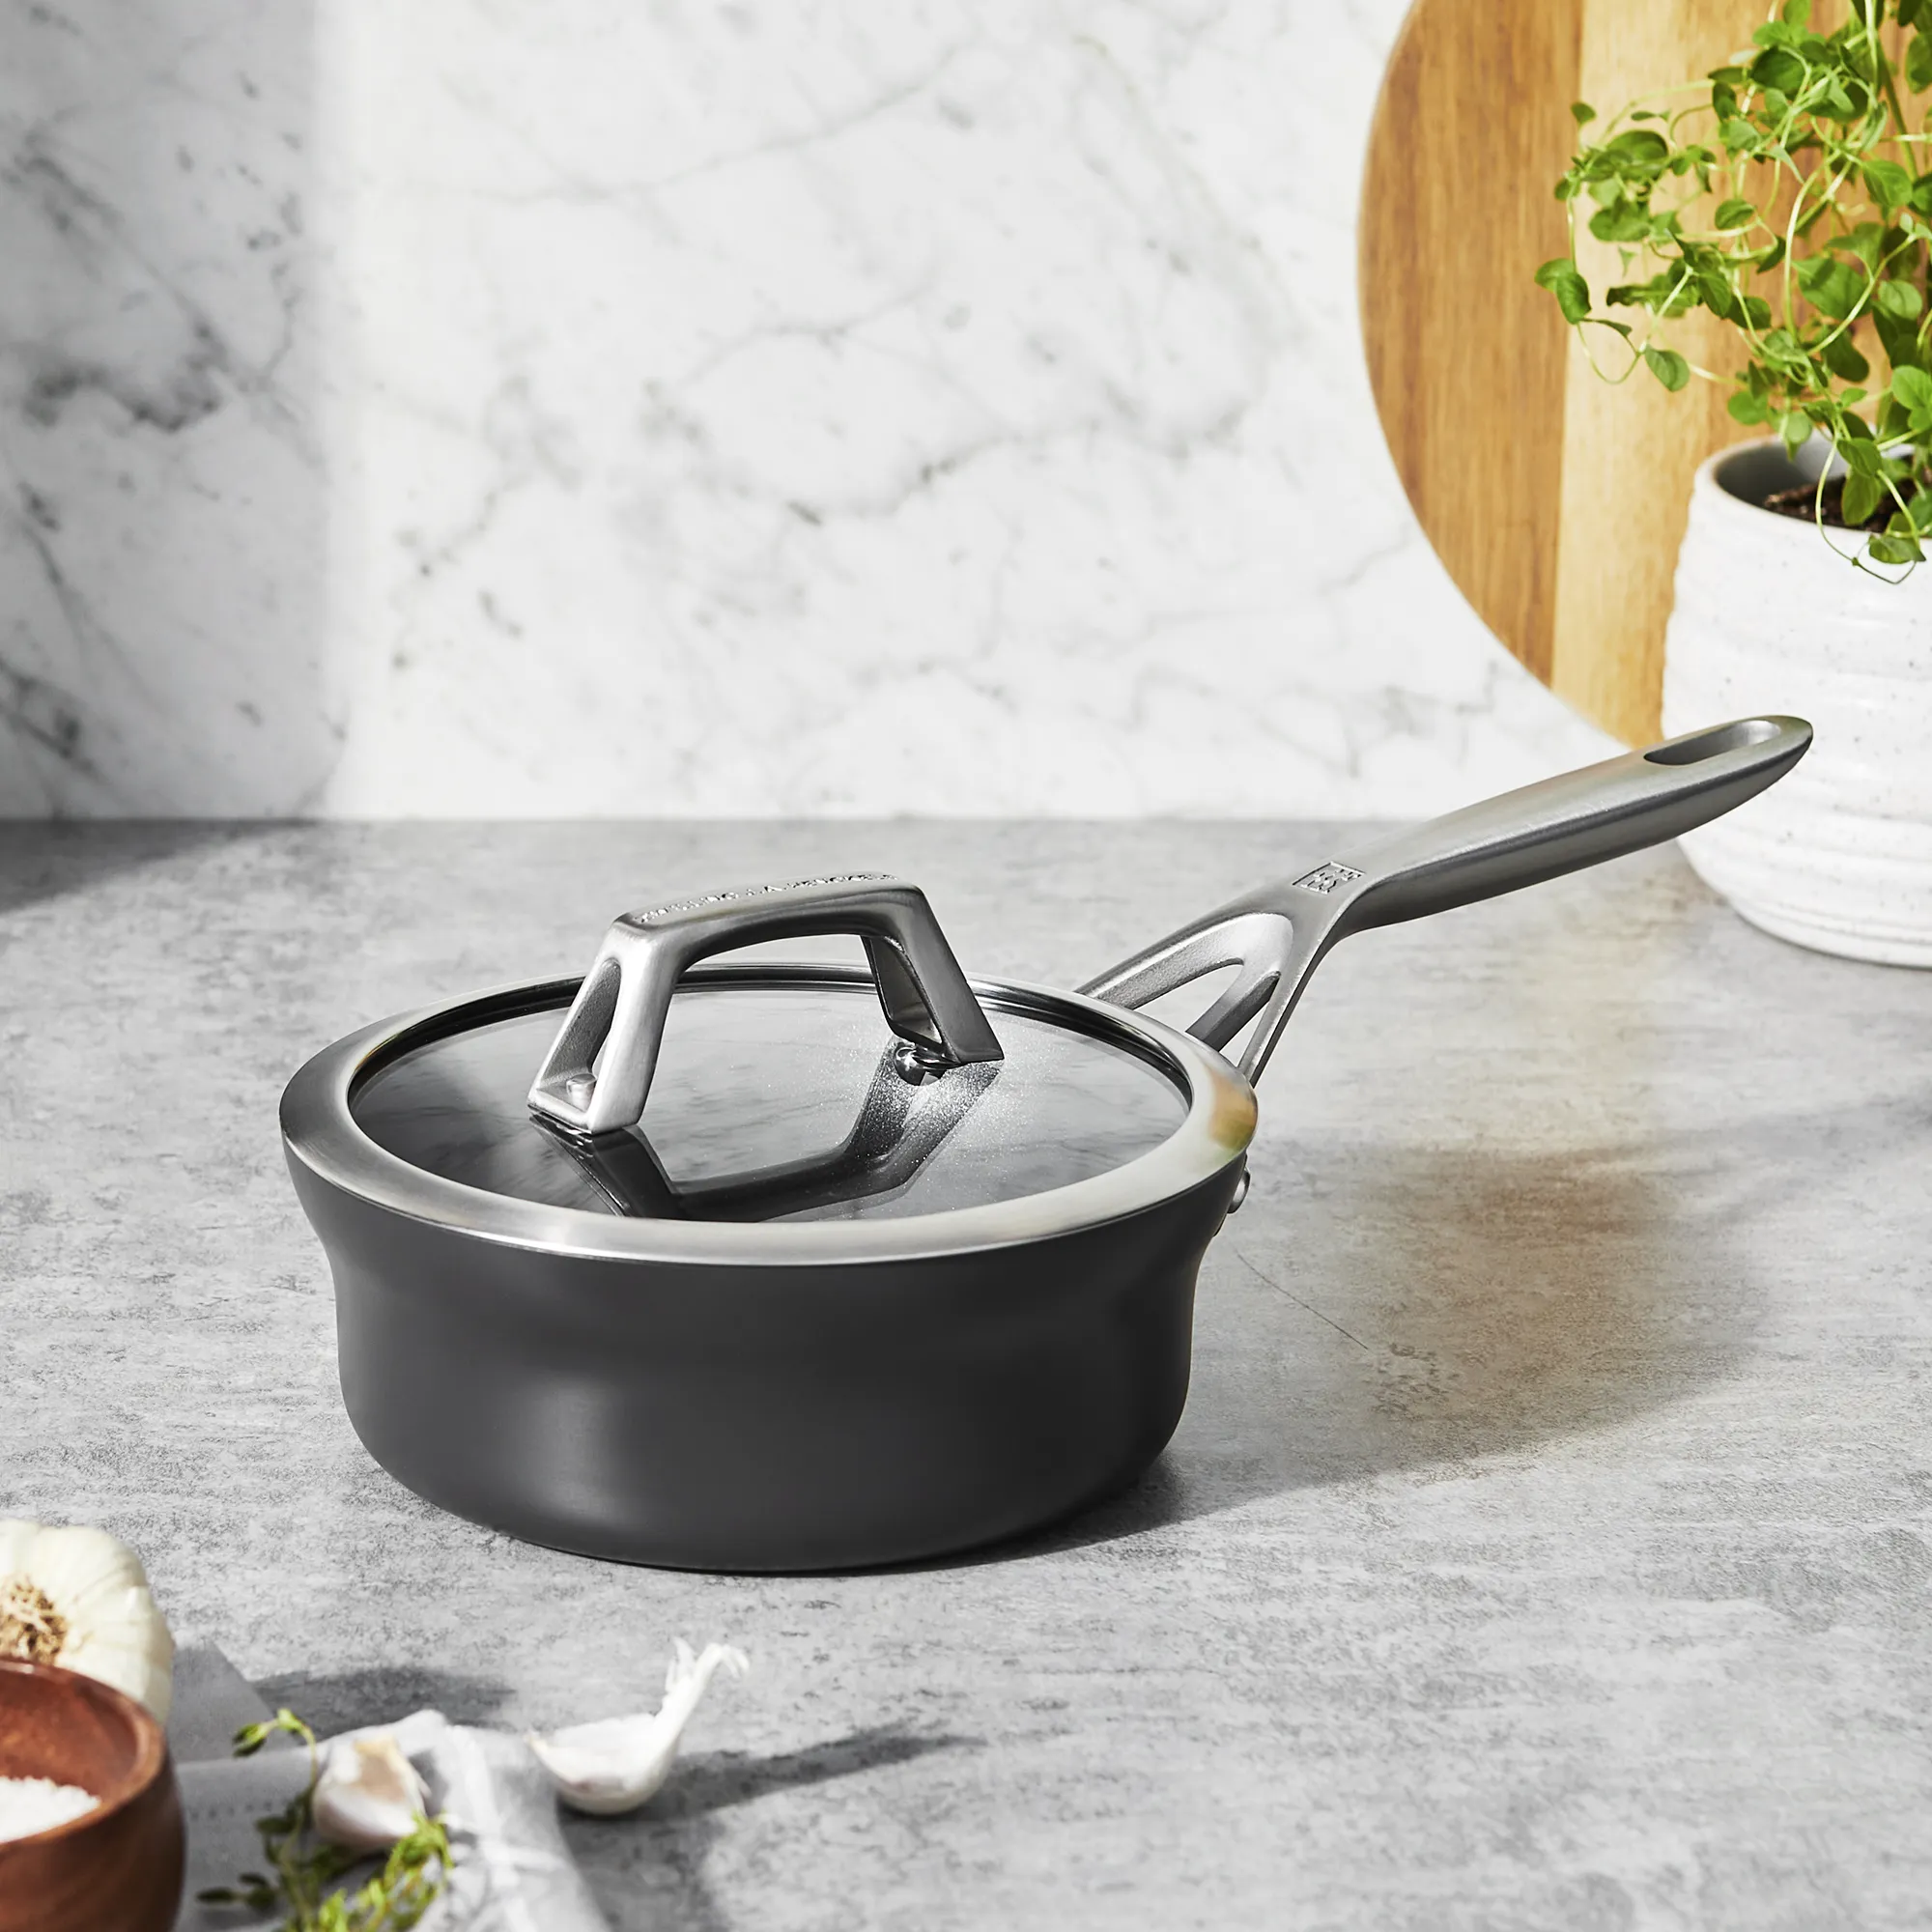 https://www.homethreads.com/files/zwilling/1021534-zwilling-motion-hard-anodized-15-qt-aluminum-nonstick-sauce-pan-with-lid-3.webp